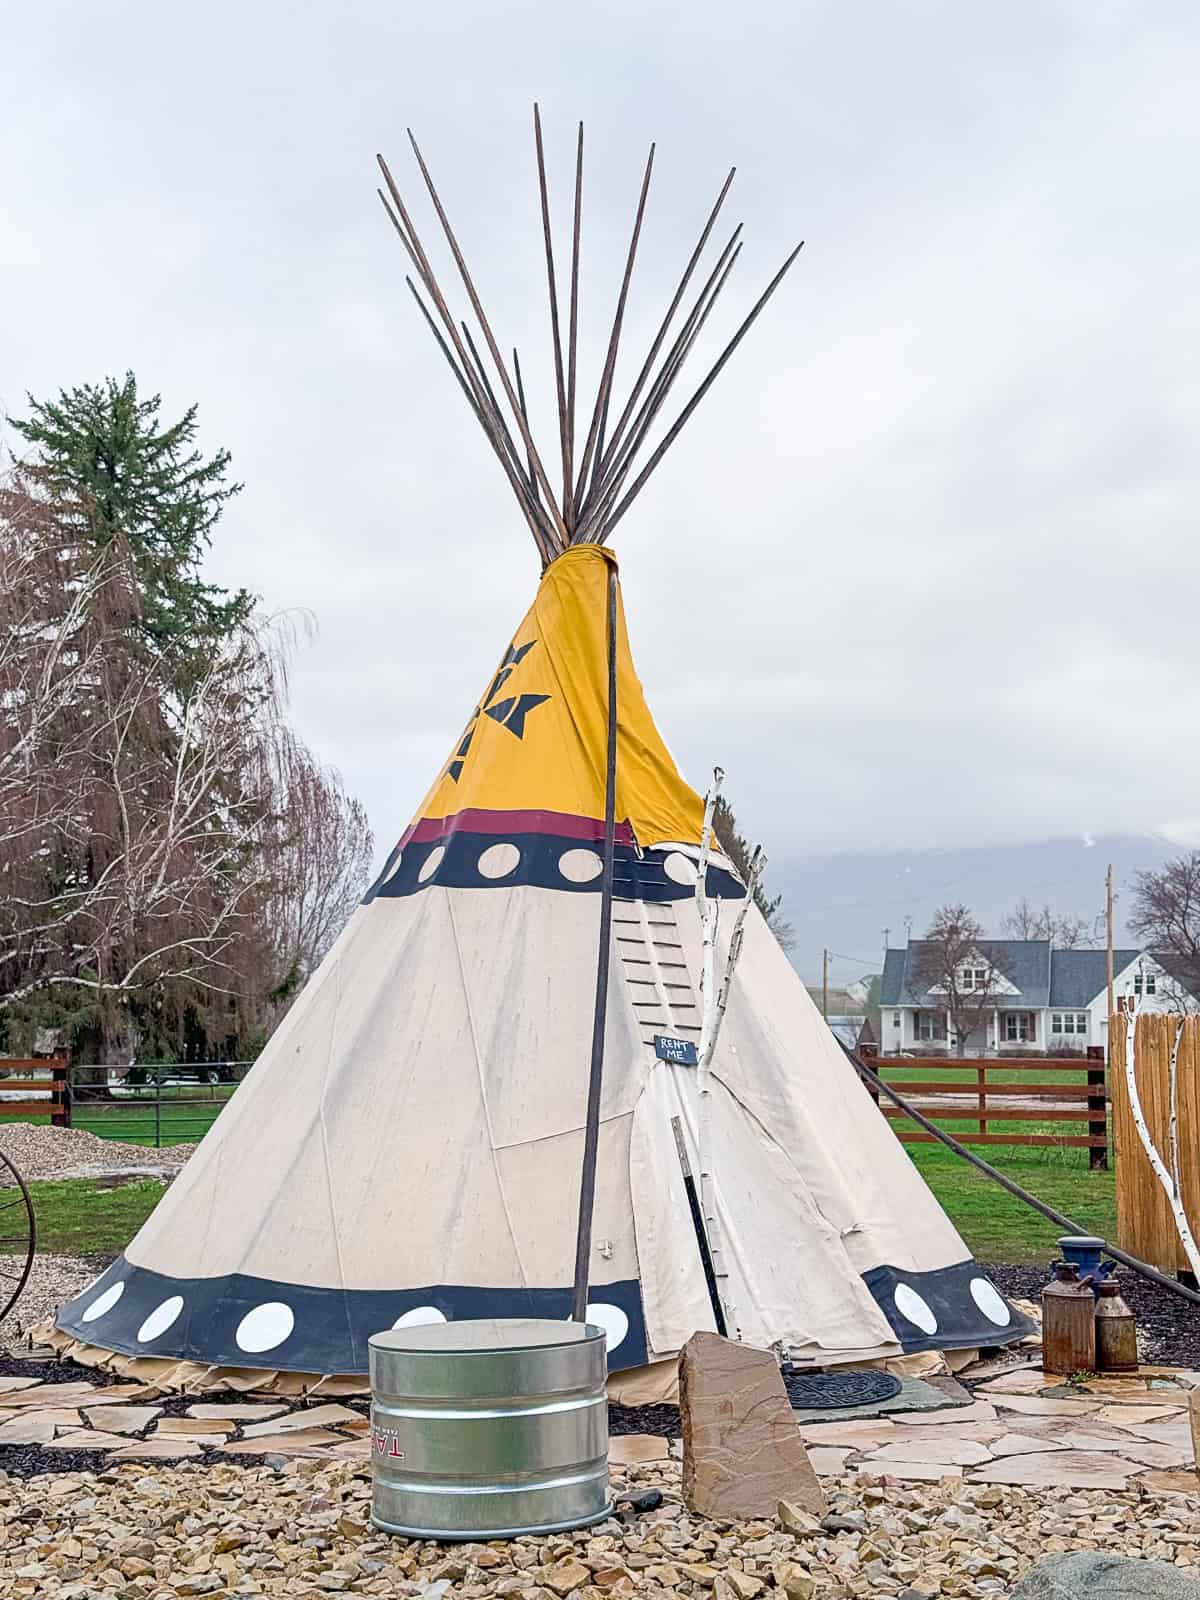 Teepee for rent in Huntsville Utah at Compass Rose Lodge Hotel